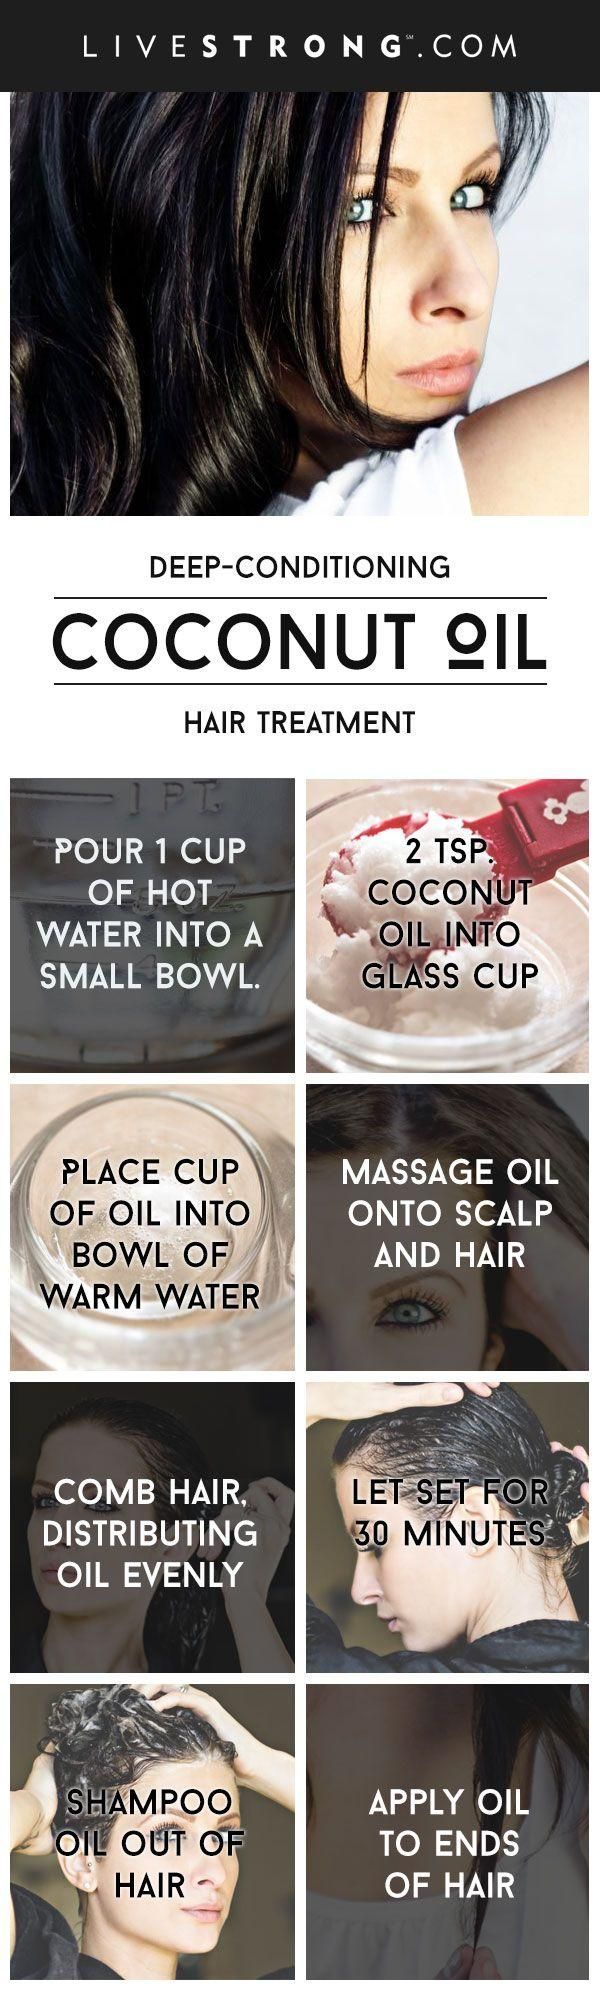 Coconut Oil Benefits for Hair and How to Use It .